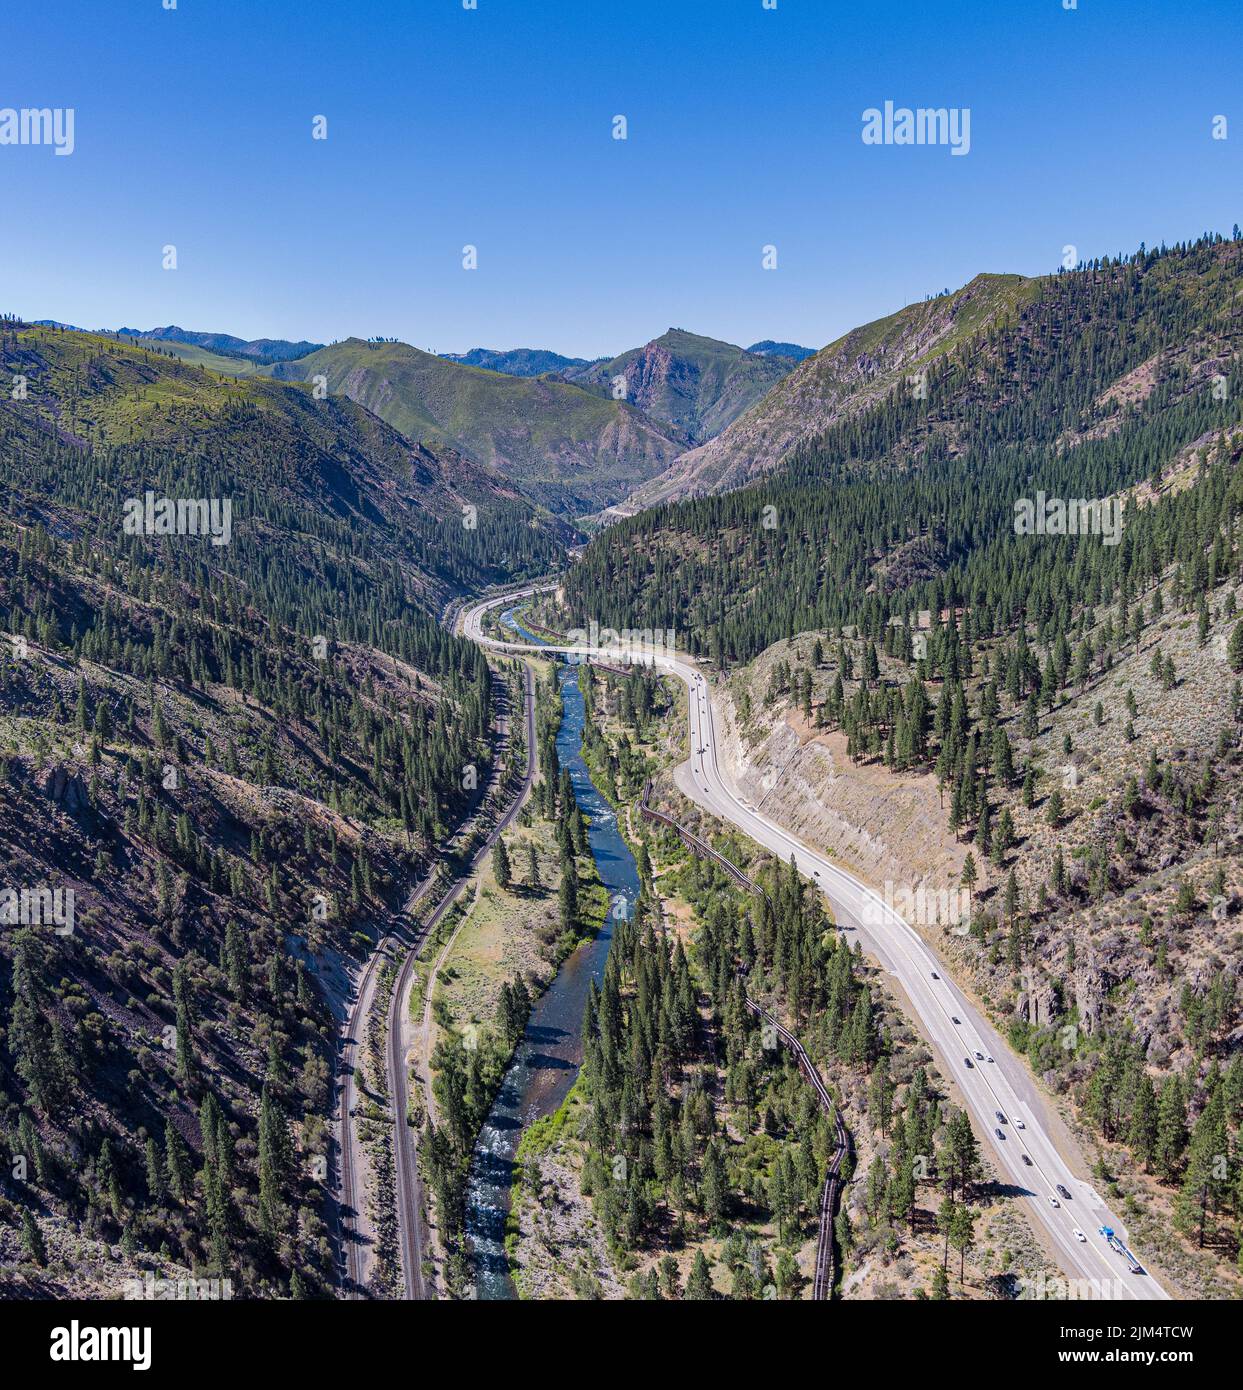 Interstate 80 leads through a deep canyon alongside the Truckee River and Transcontinental Railroad in northern California. Stock Photo